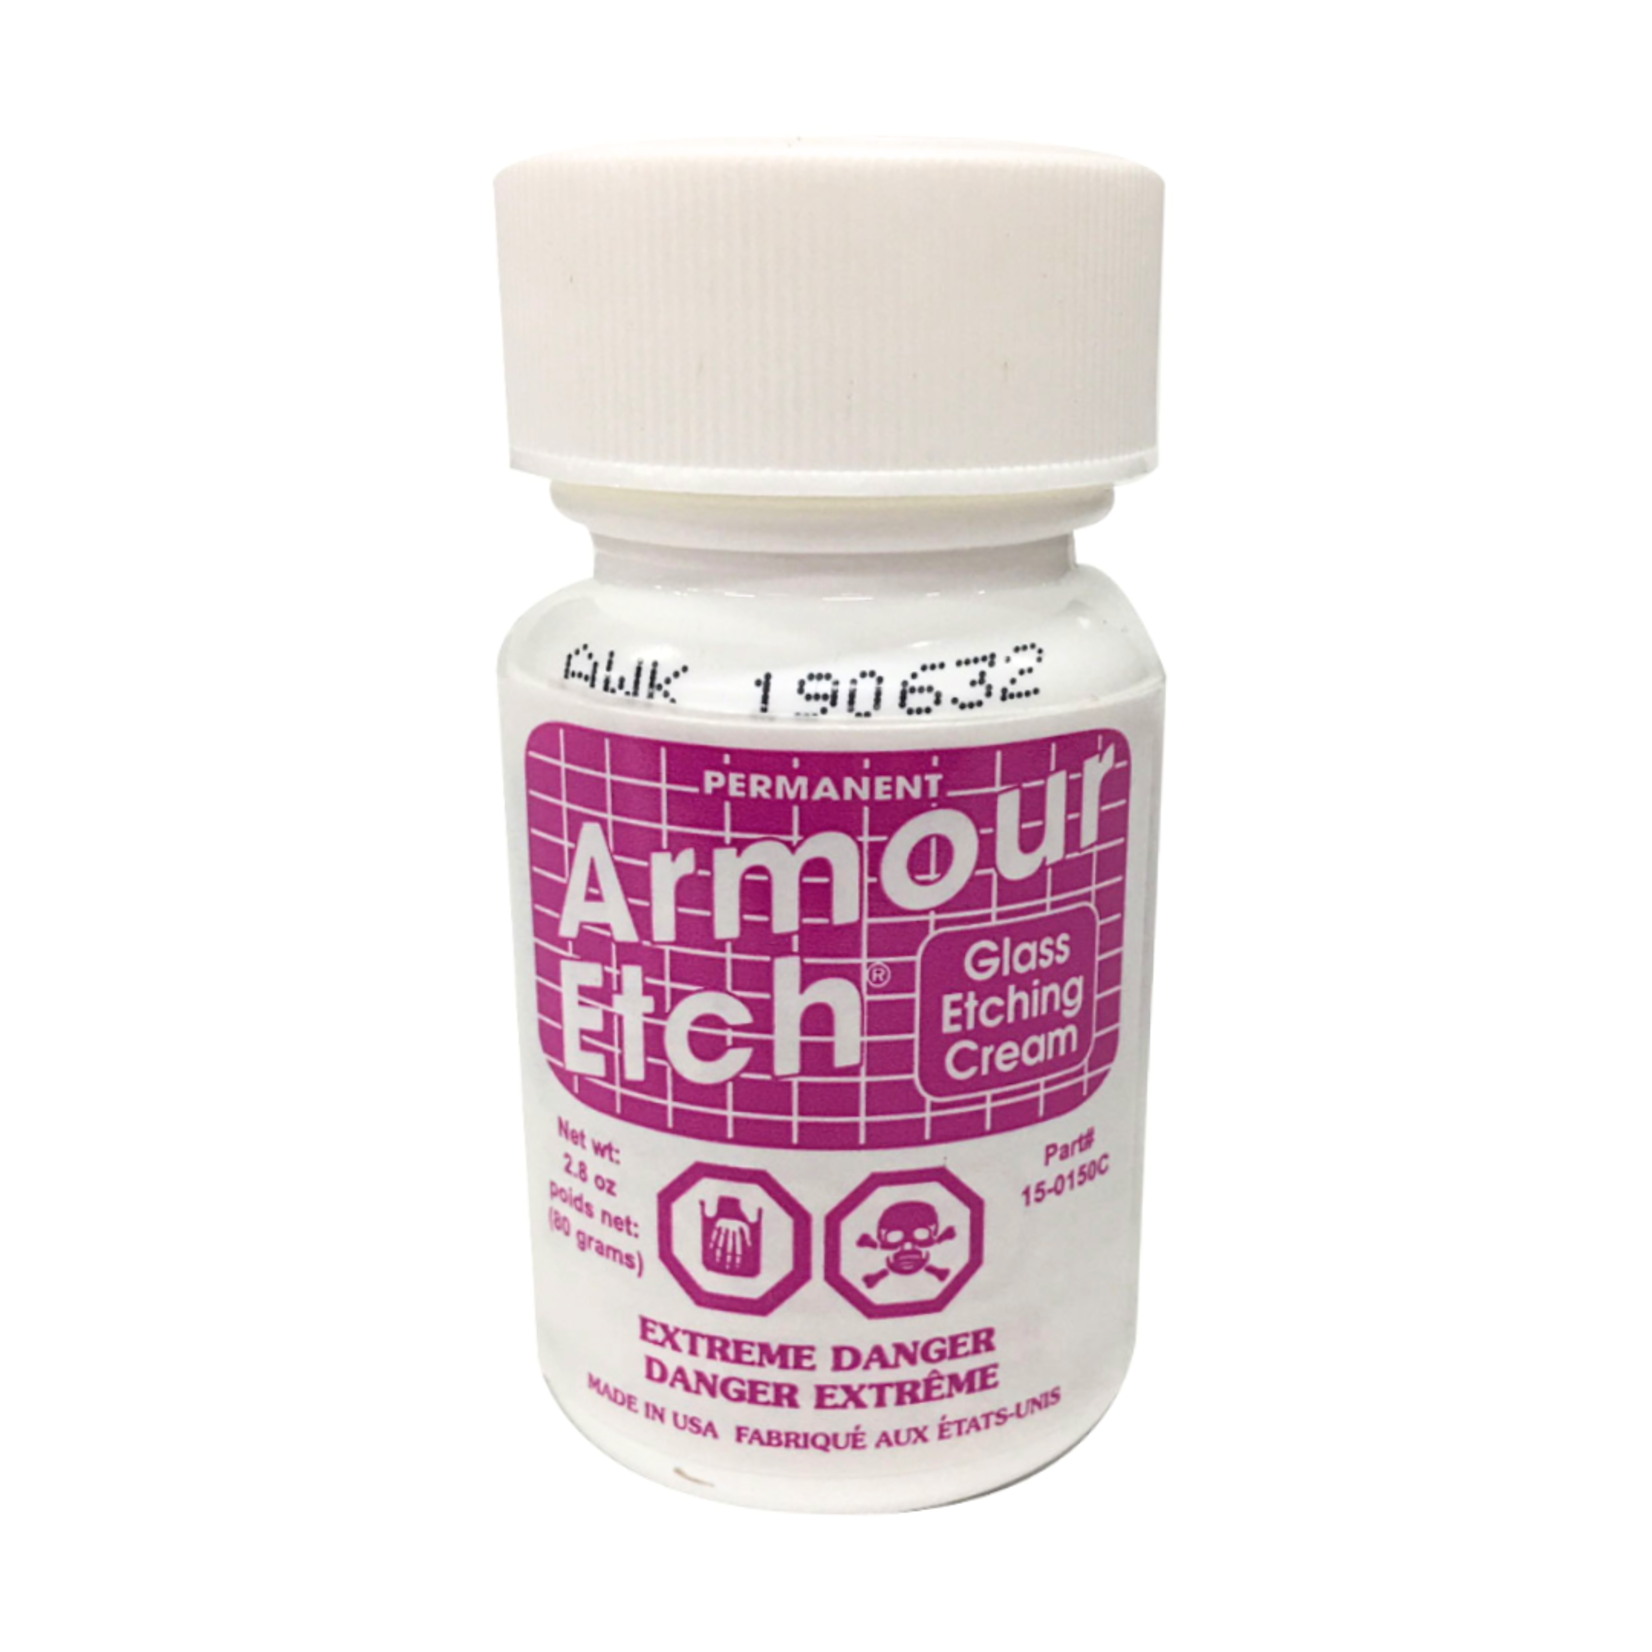 ARMOUR PRODUCTS ARMOUR ETCH GLASS ETCHING CREAM 2.8OZ